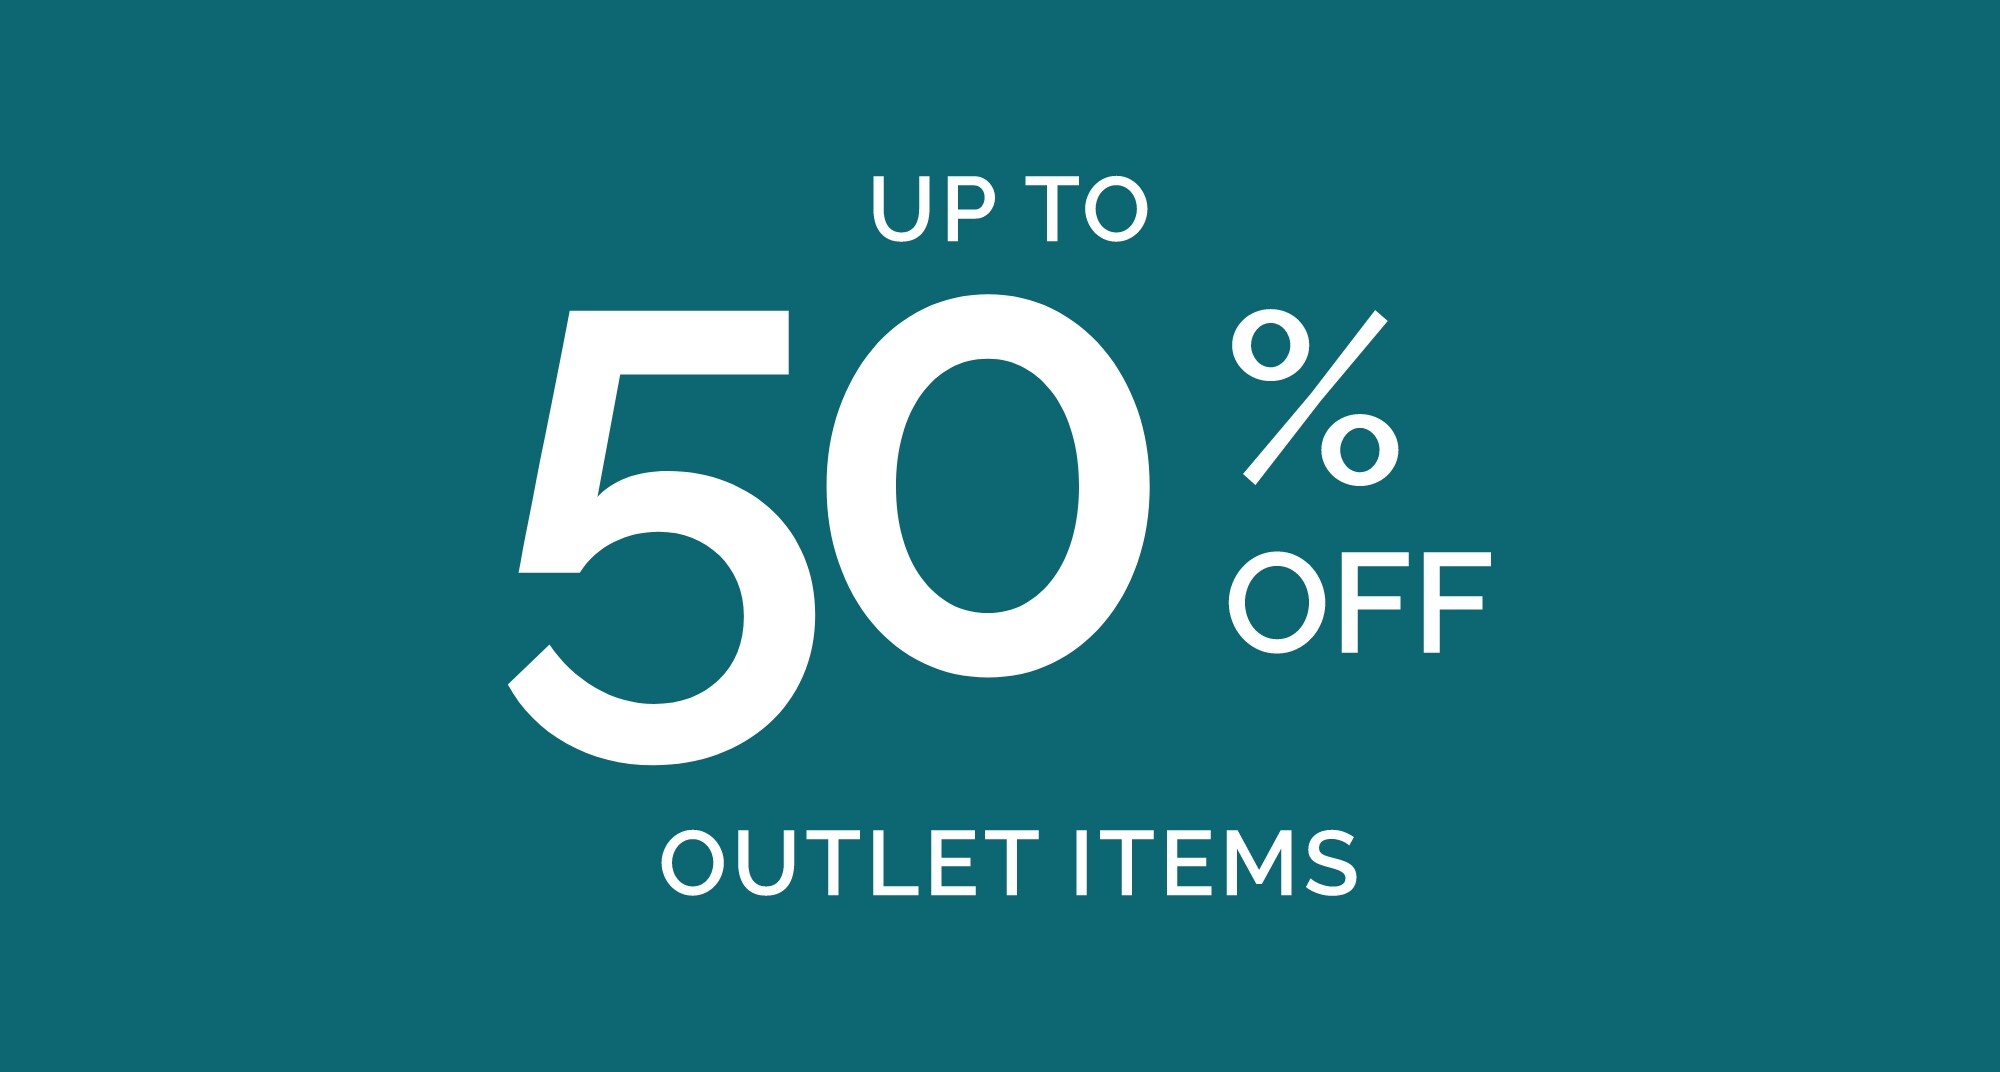 Up To 50% Off Outlet Items.